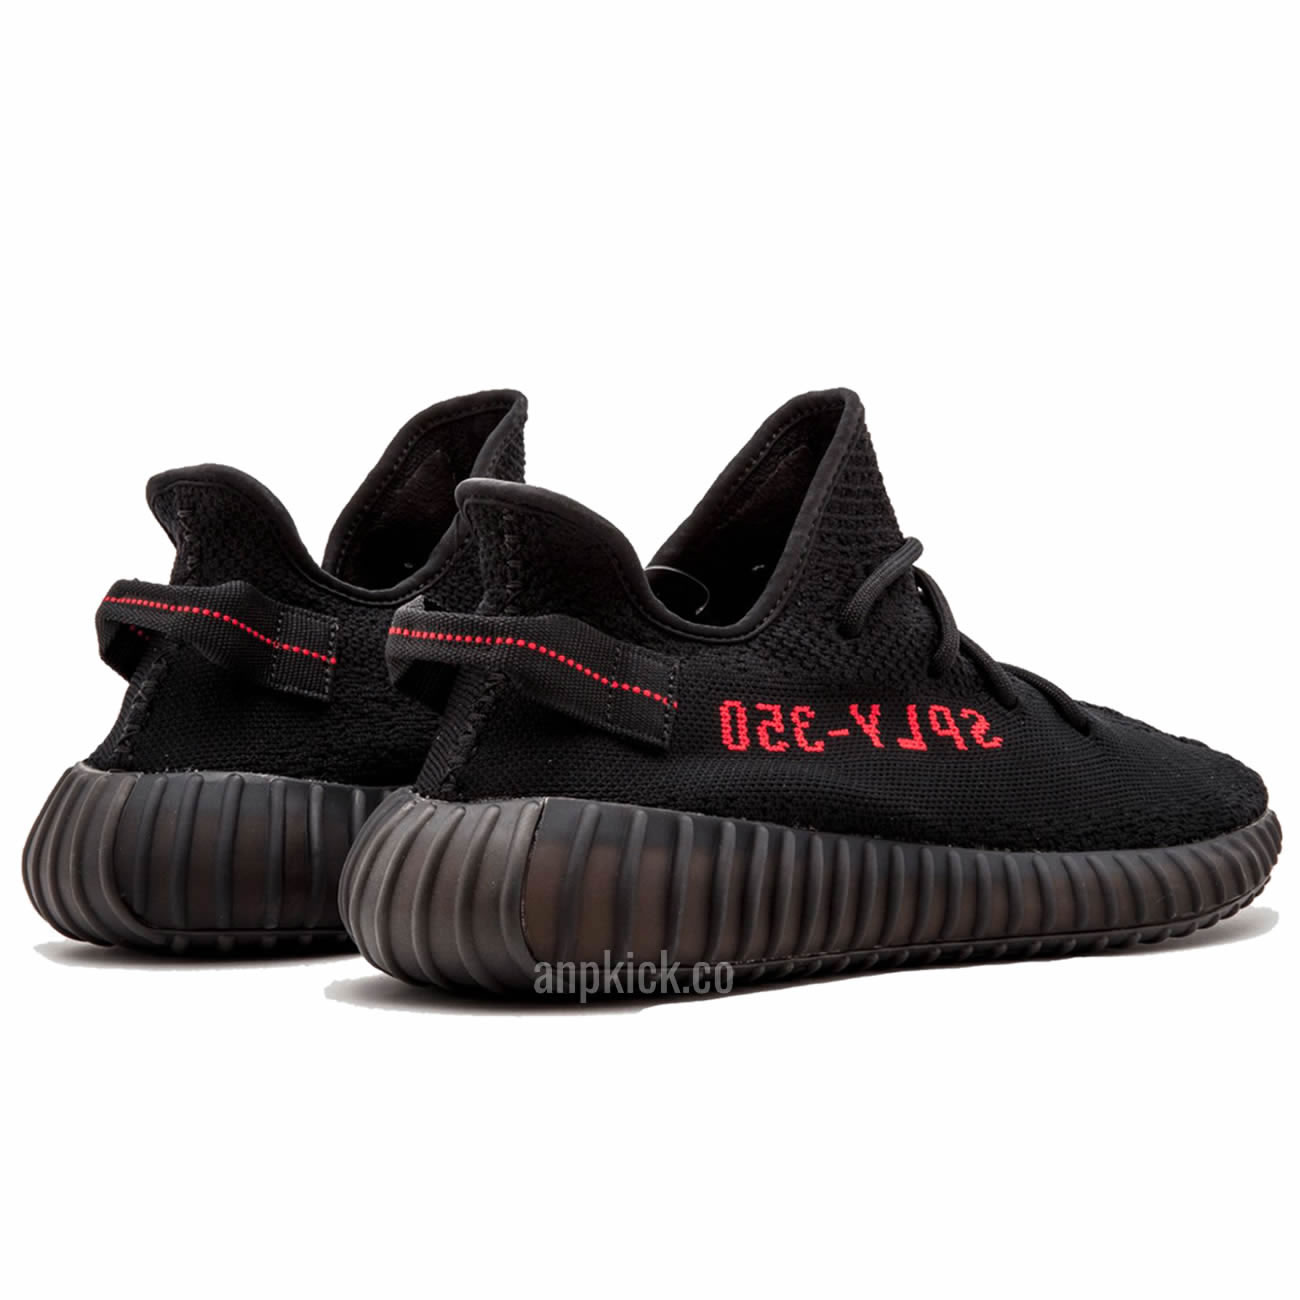 Yeezy Boost 350 V2 Bred Black Red 2020 New Release Cp9652 (3) - www.newkick.org